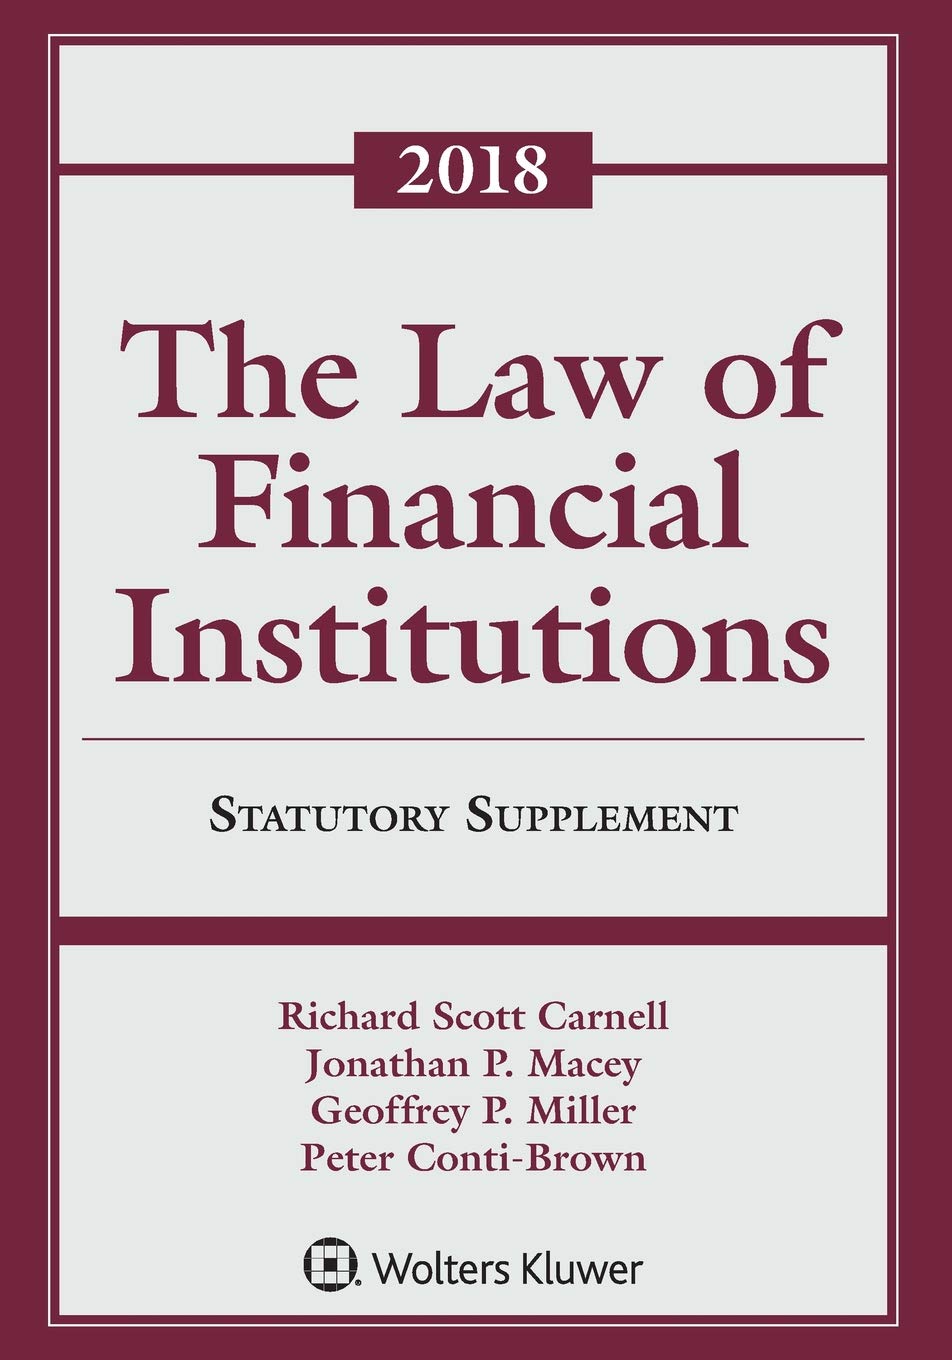 Law of Financial Institutions: 2018 Statutory Supplement (Supplements)